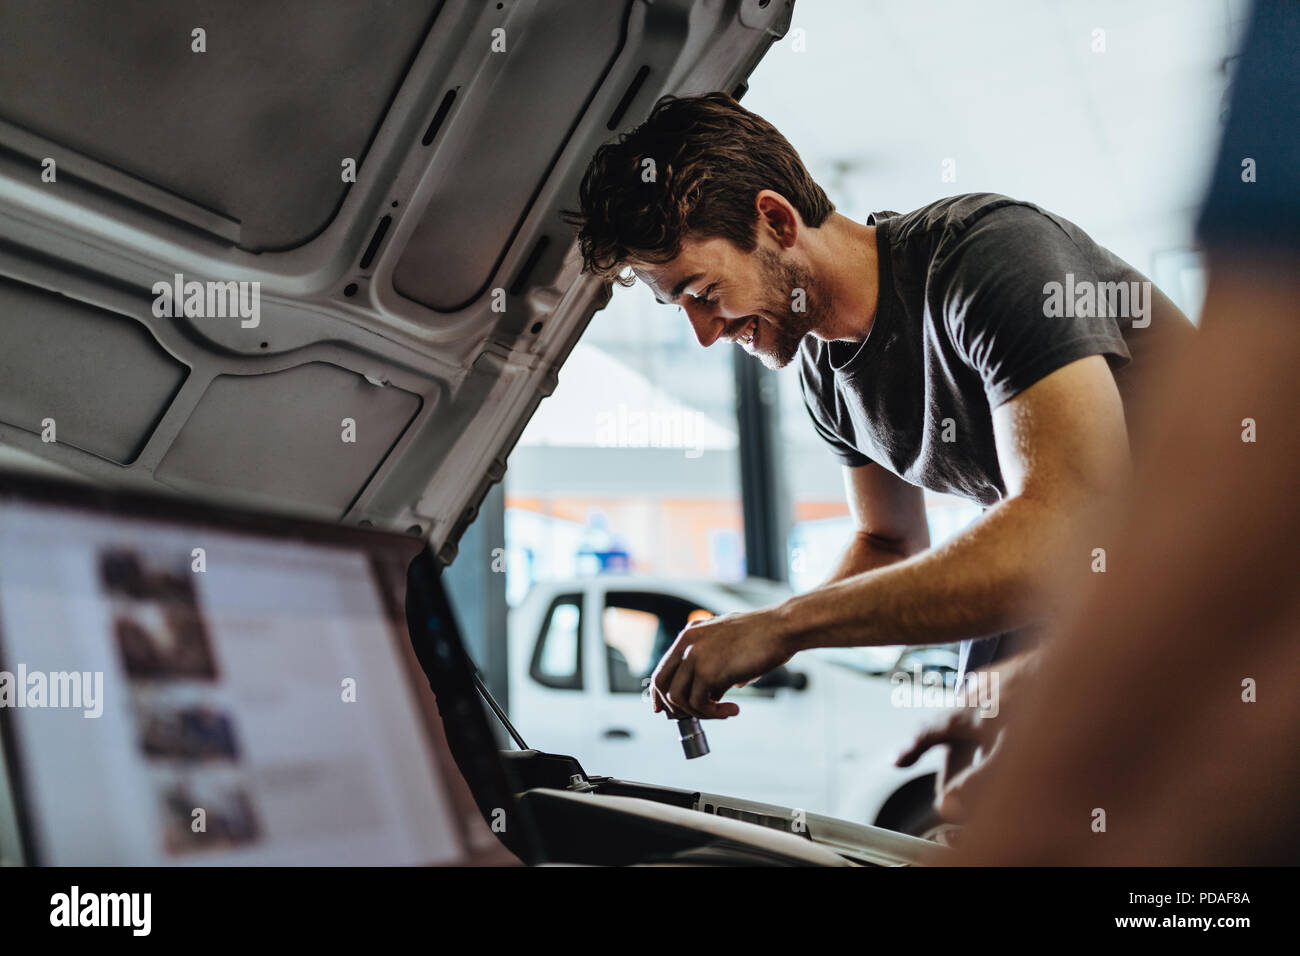 Smiling young man repairing the car in garage with coworker using laptop in front. Mechanic working under the hood of a vehicle. Stock Photo